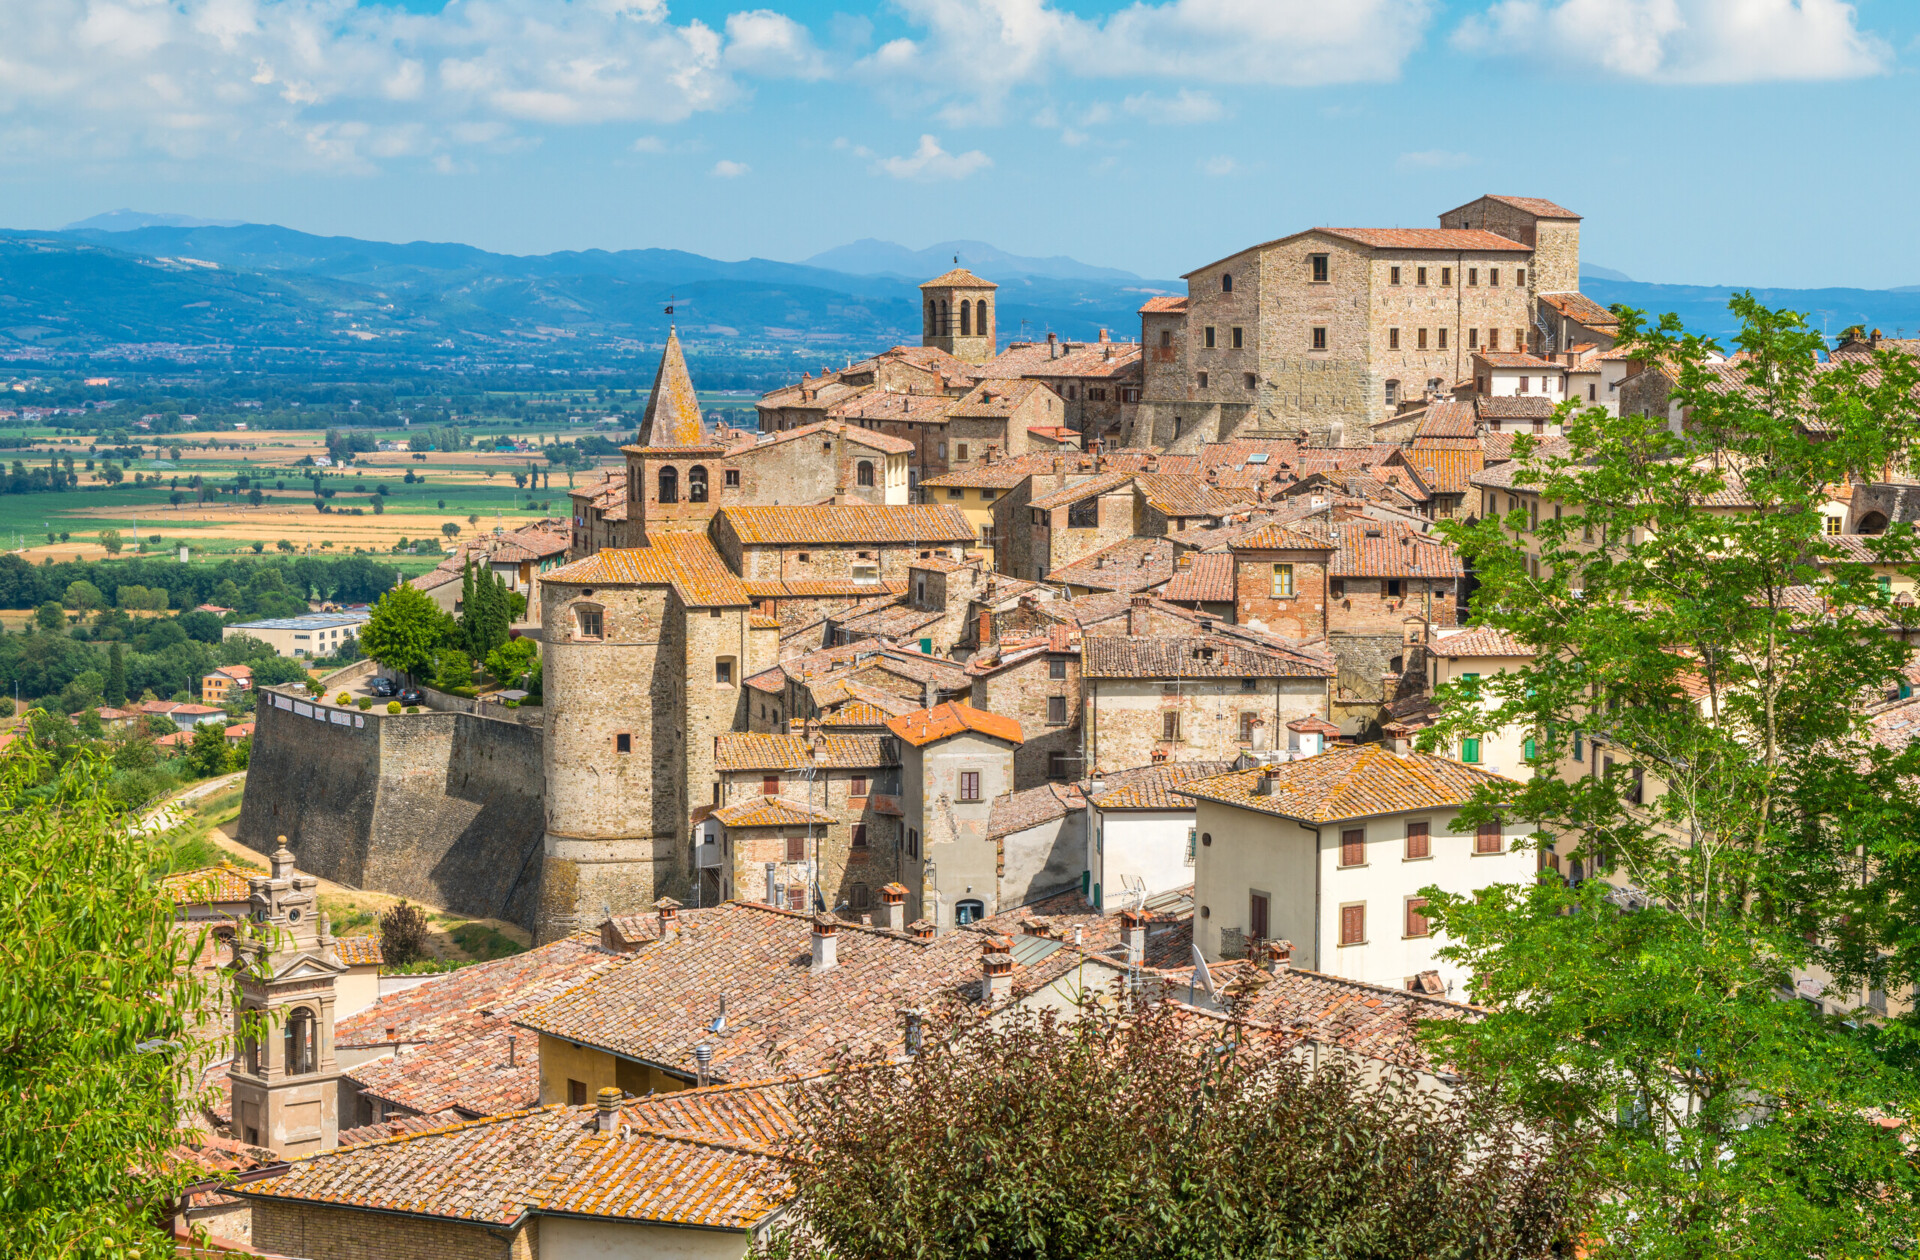 Panoramic view of Anghiari, in the Province of Arezzo, Tuscany, Italy.